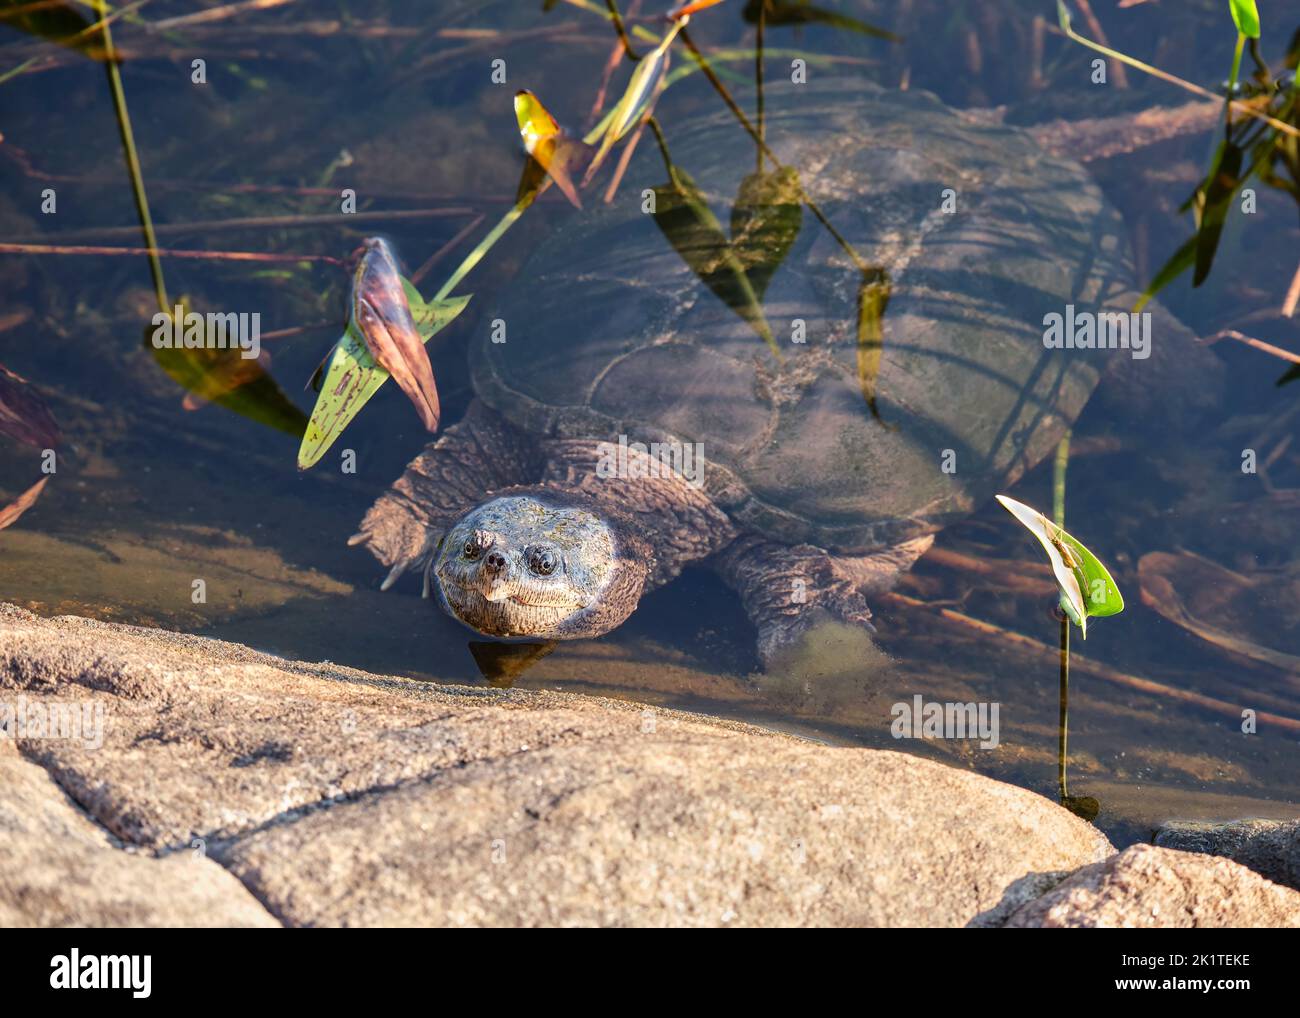 A large snapping turtle lifts his head above the water right by a rocky shore on Crab Lake in Kawartha Highlands Provincial Park, Ontario. Stock Photo